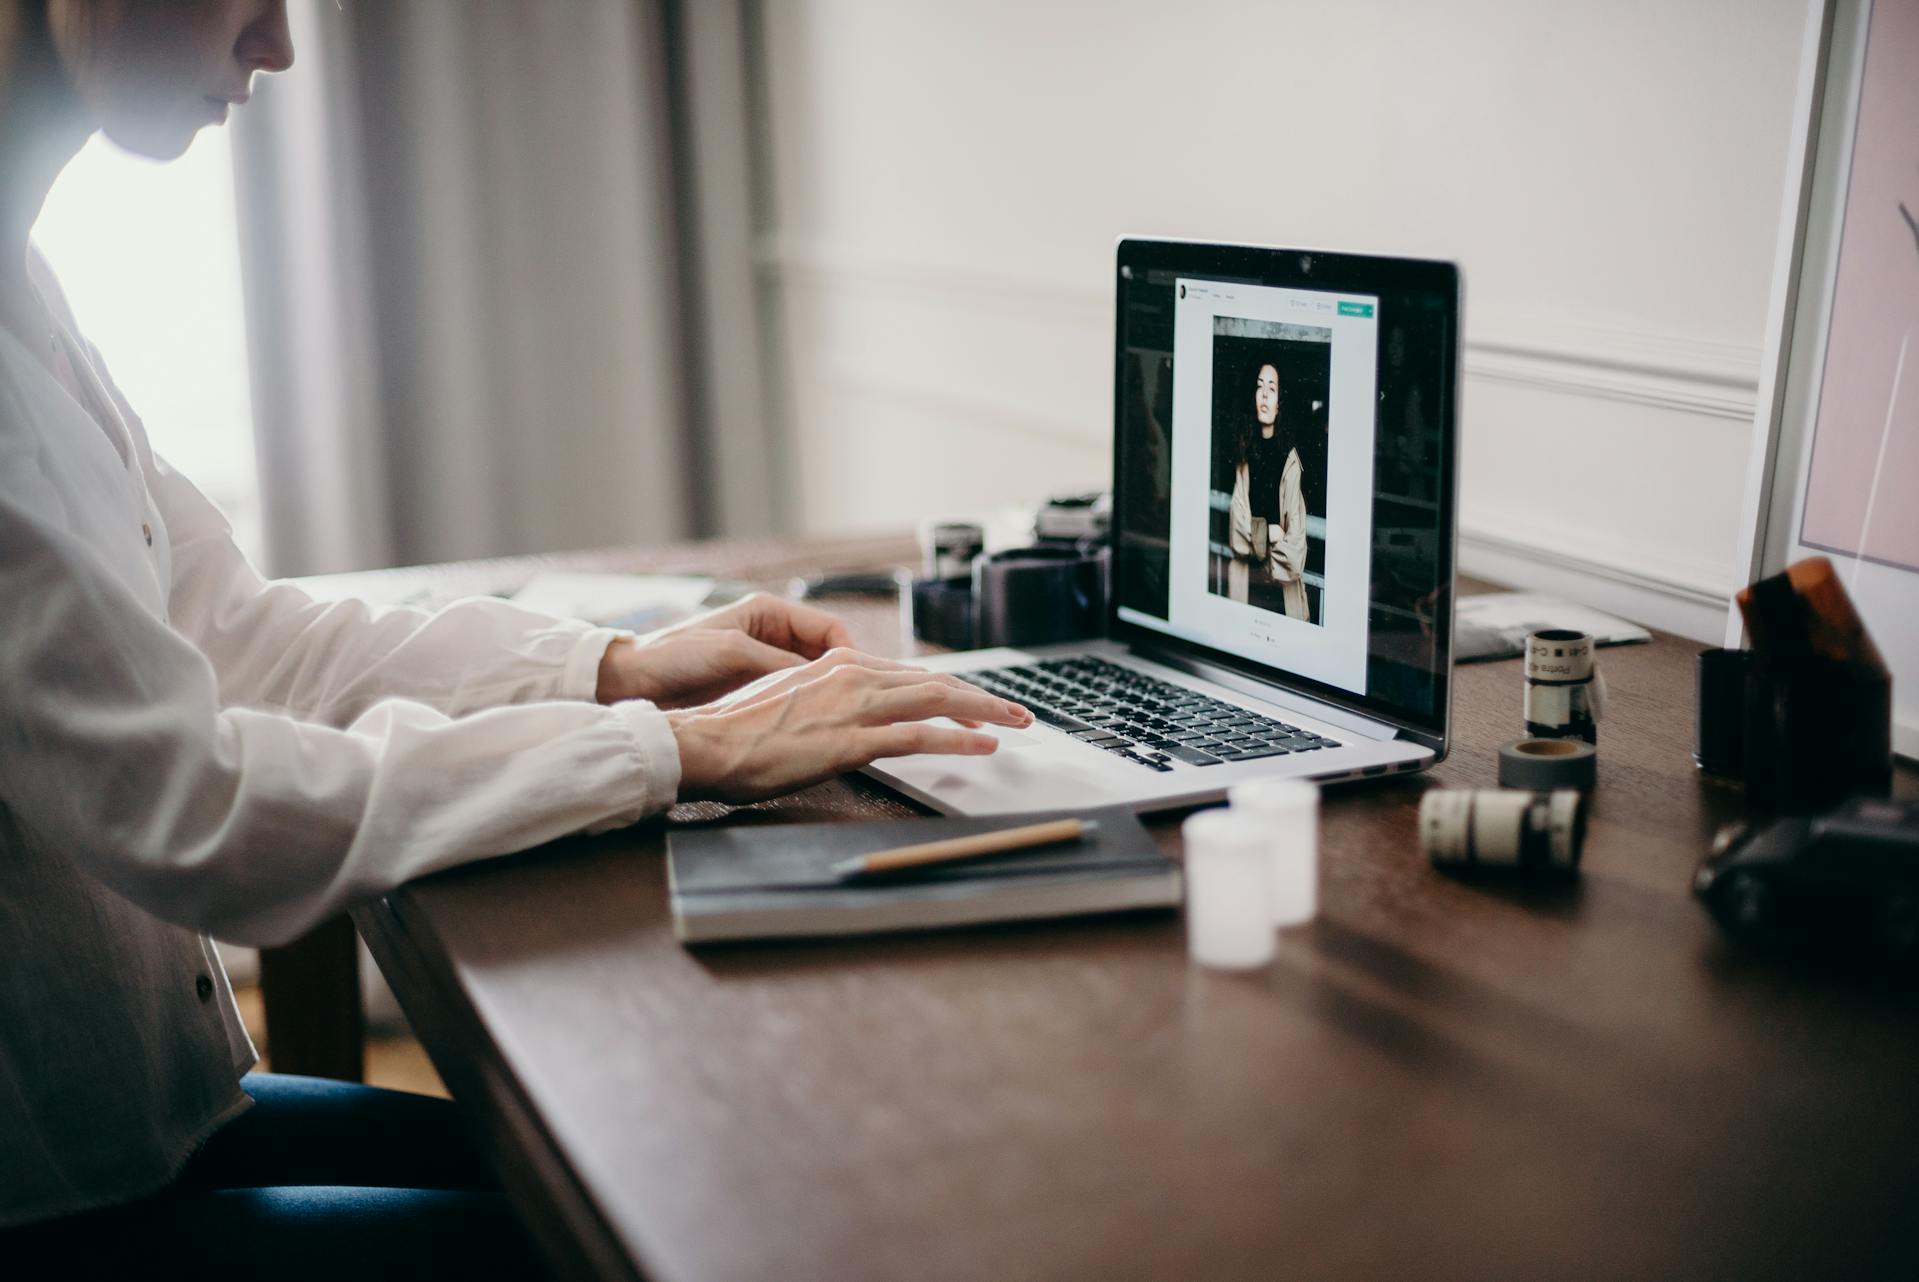 A woman viewing a photo on a laptop | Source: Pexels